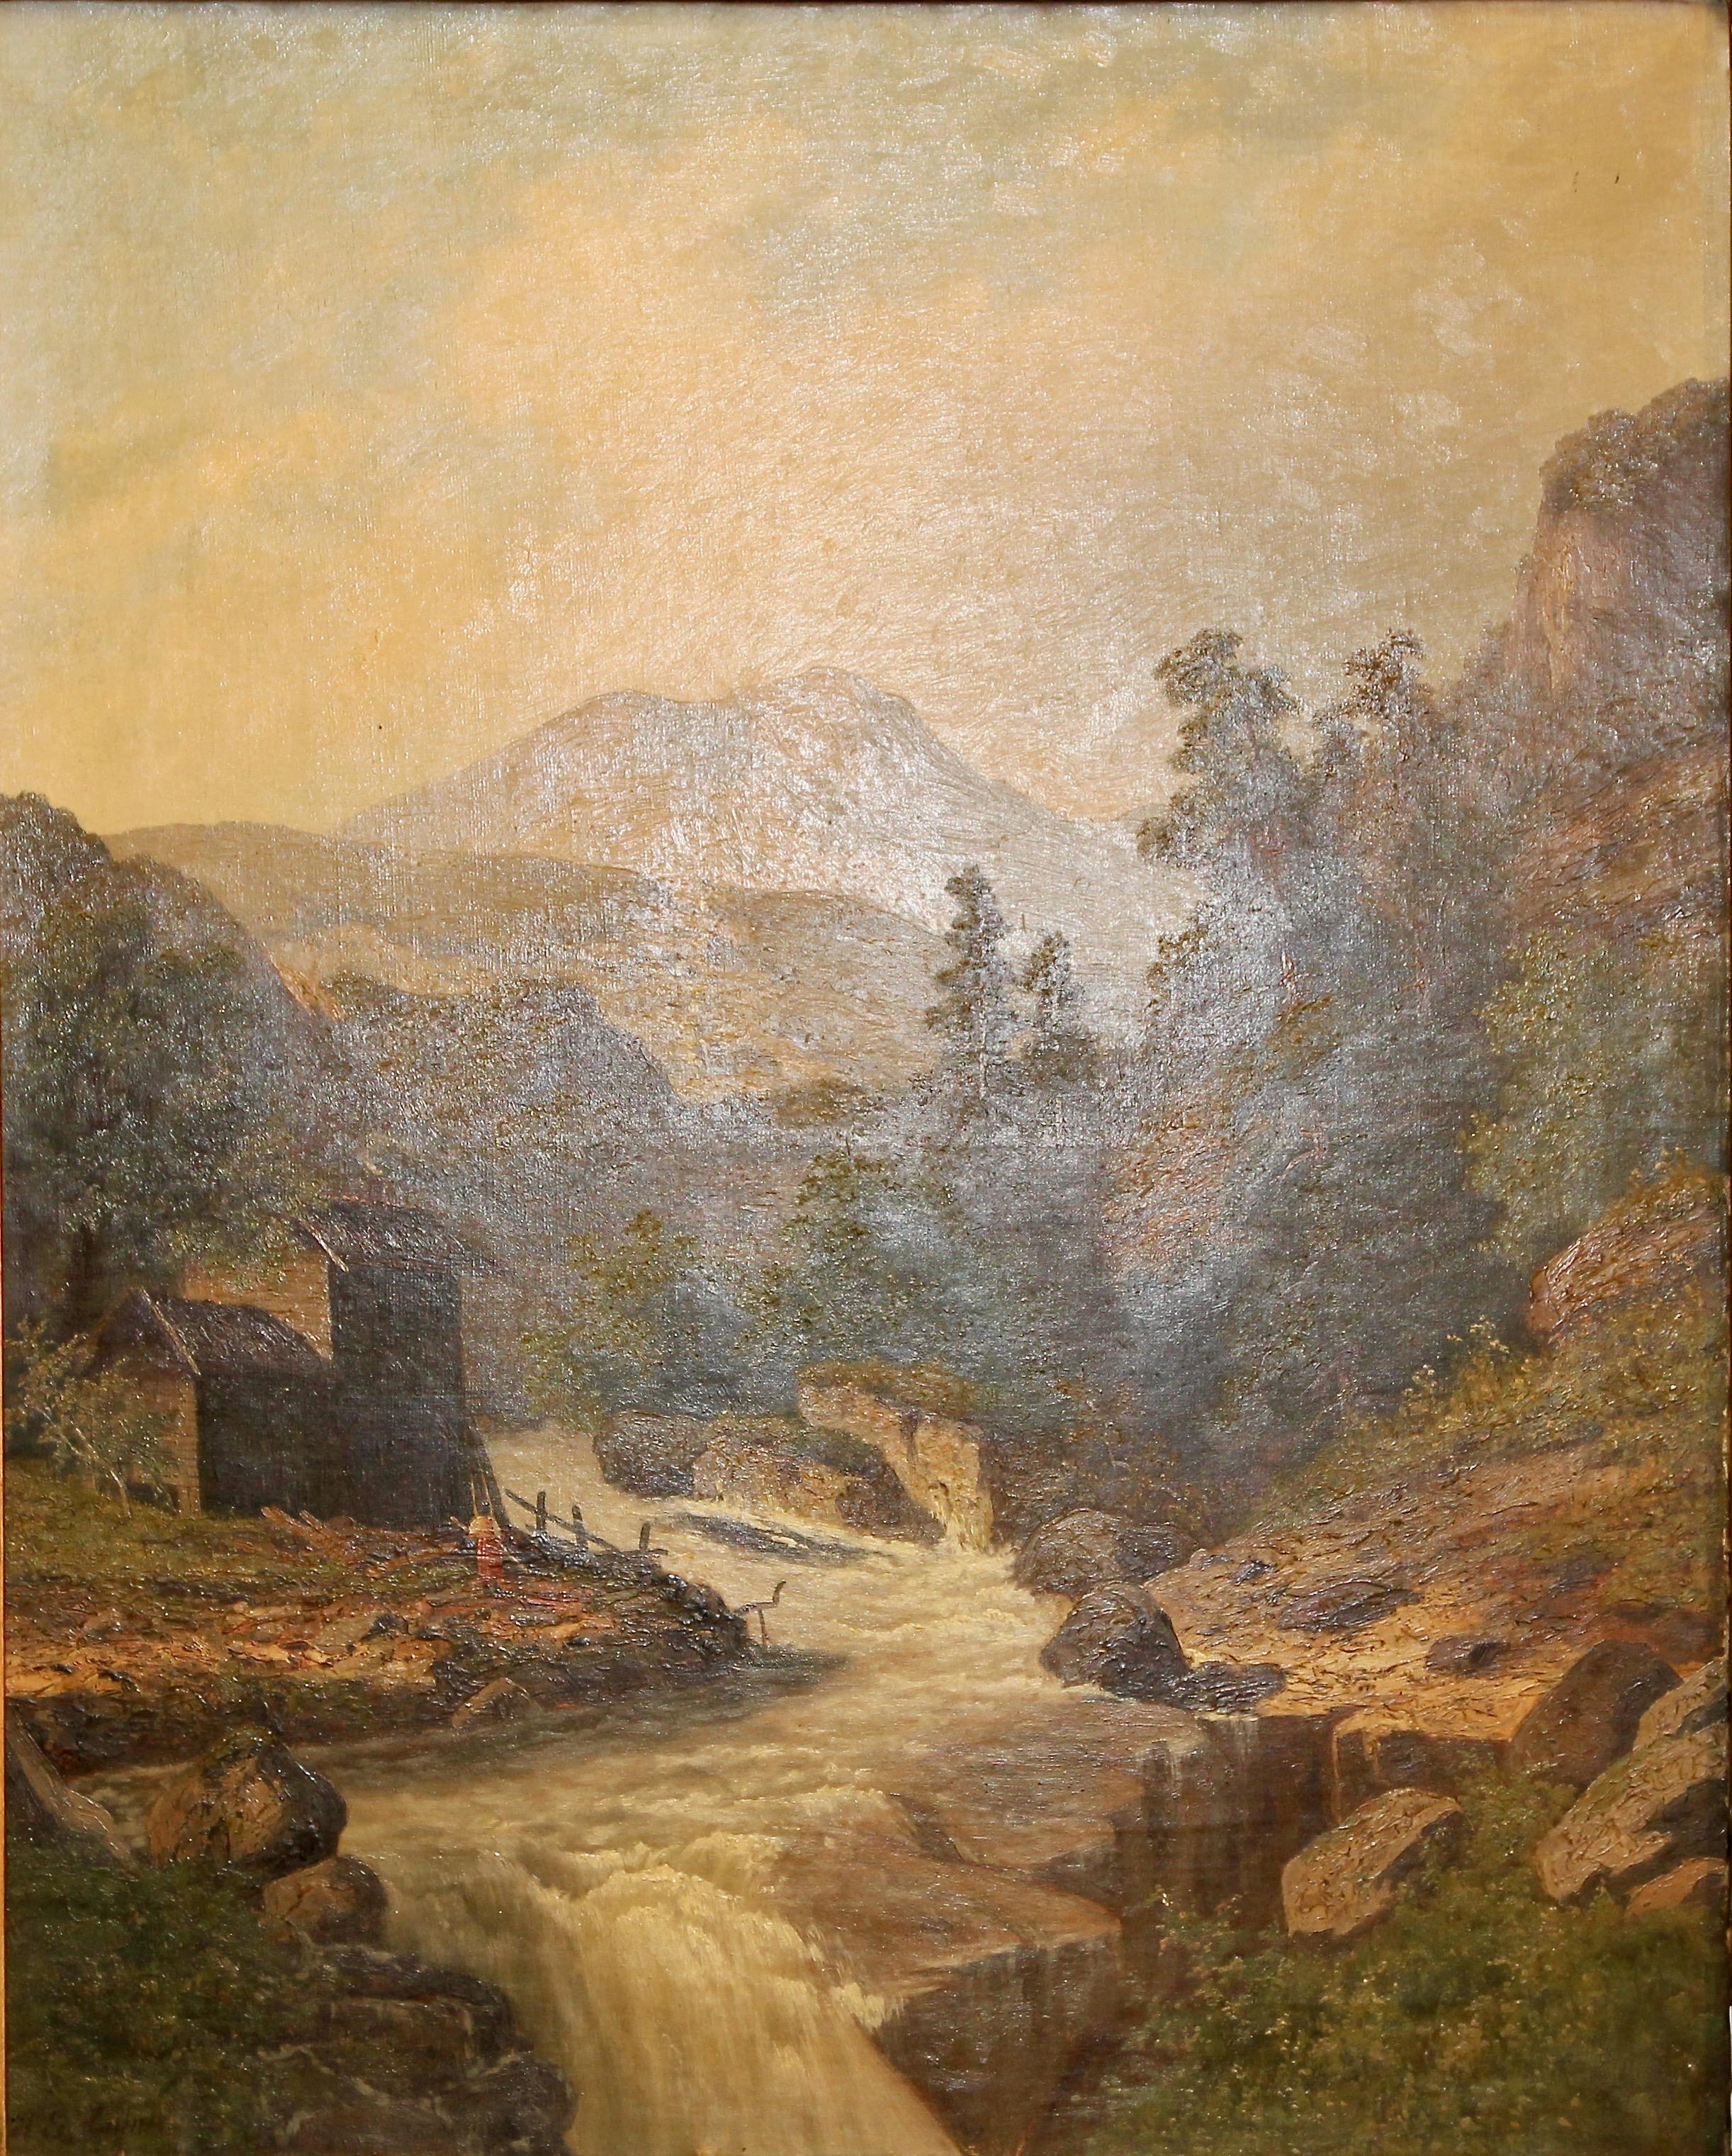 Oil painting, 19th century, river and mountain landscape.  - Painting by Unknown